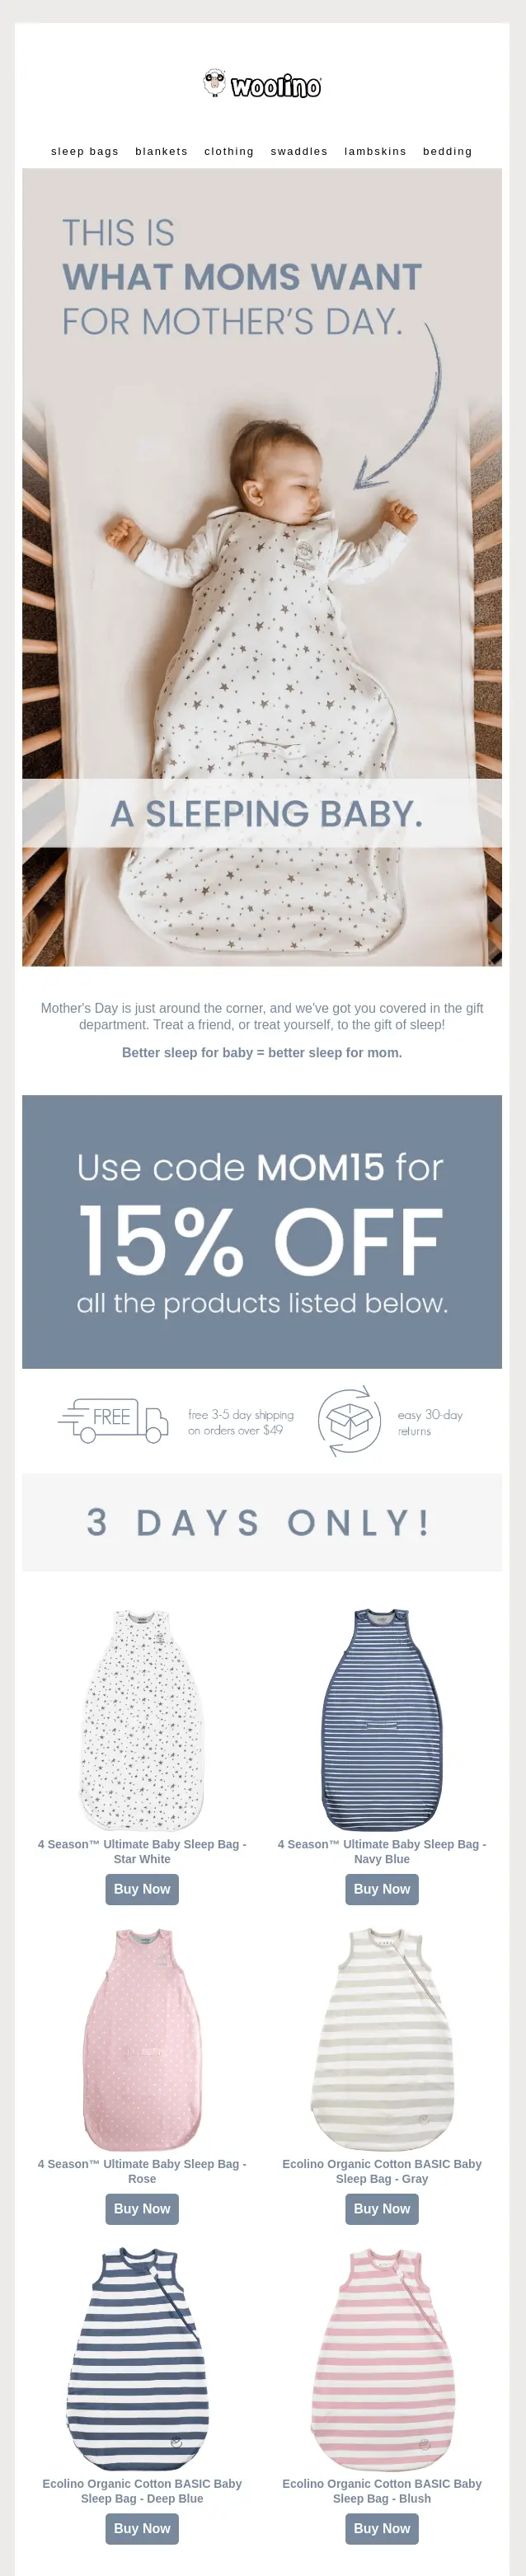 Image shows a mother’s day email campaign from Woolino